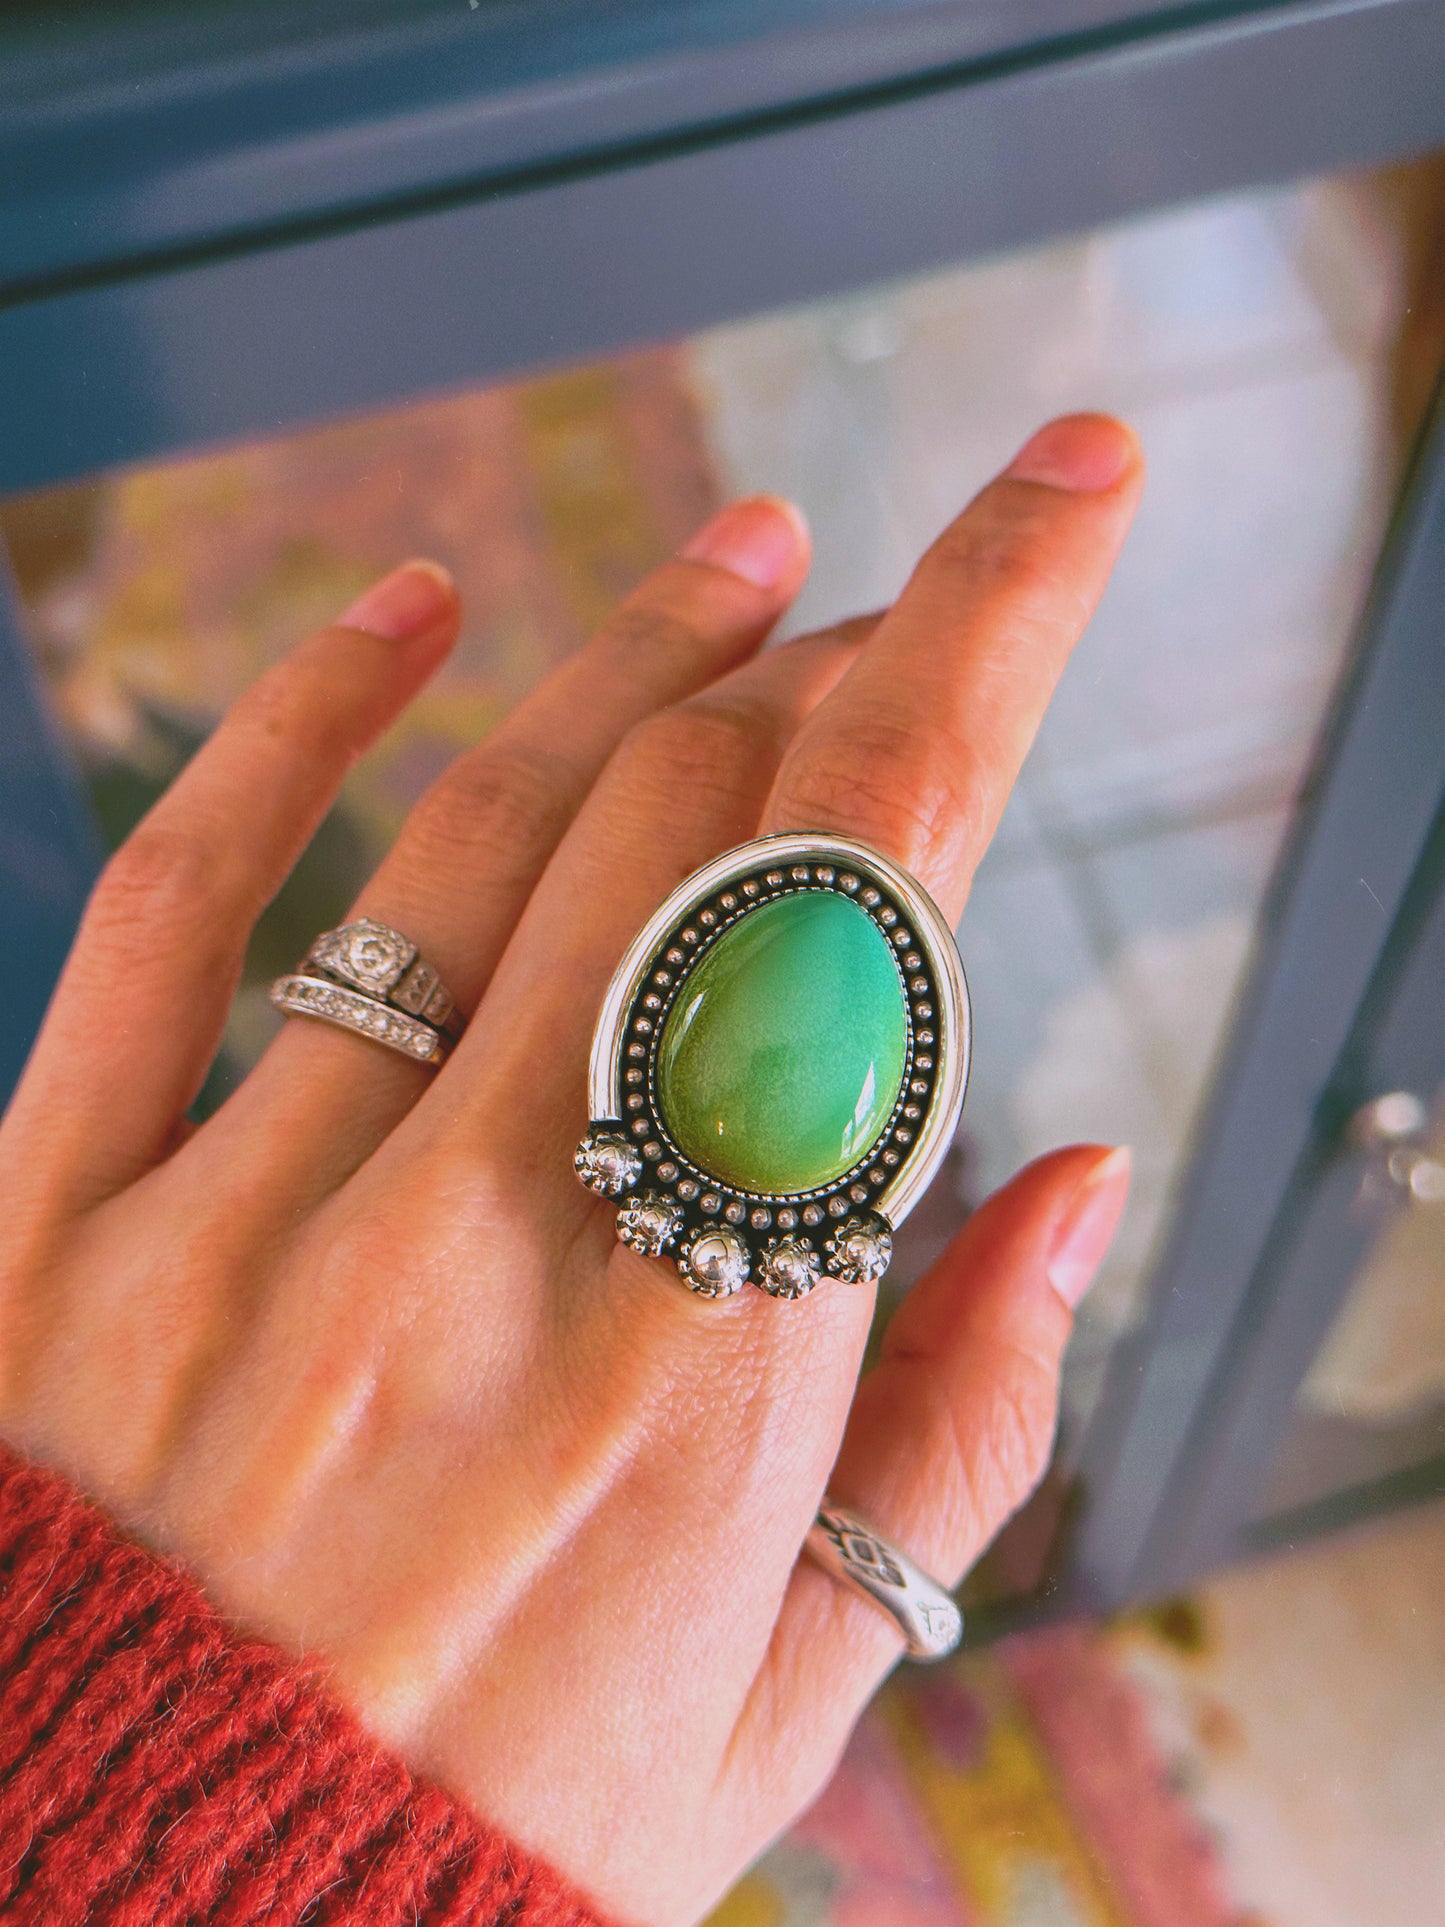 Stunning Silver Arch Ring with Gradient Polychrome Turquoise - Finished in Your Size